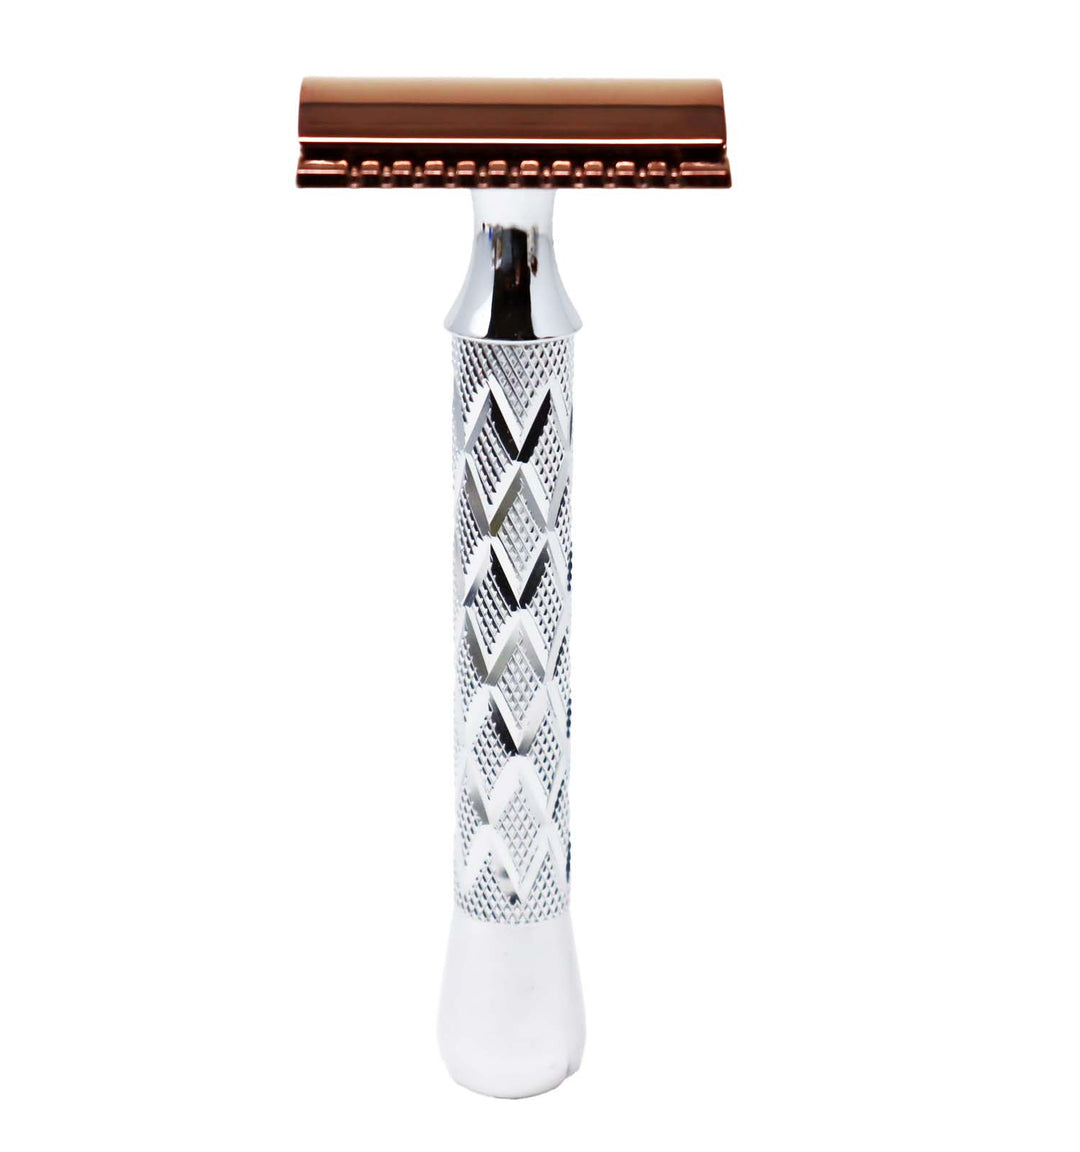 

Romer 7 is a safety razor with a closed comb and a rose gold head.